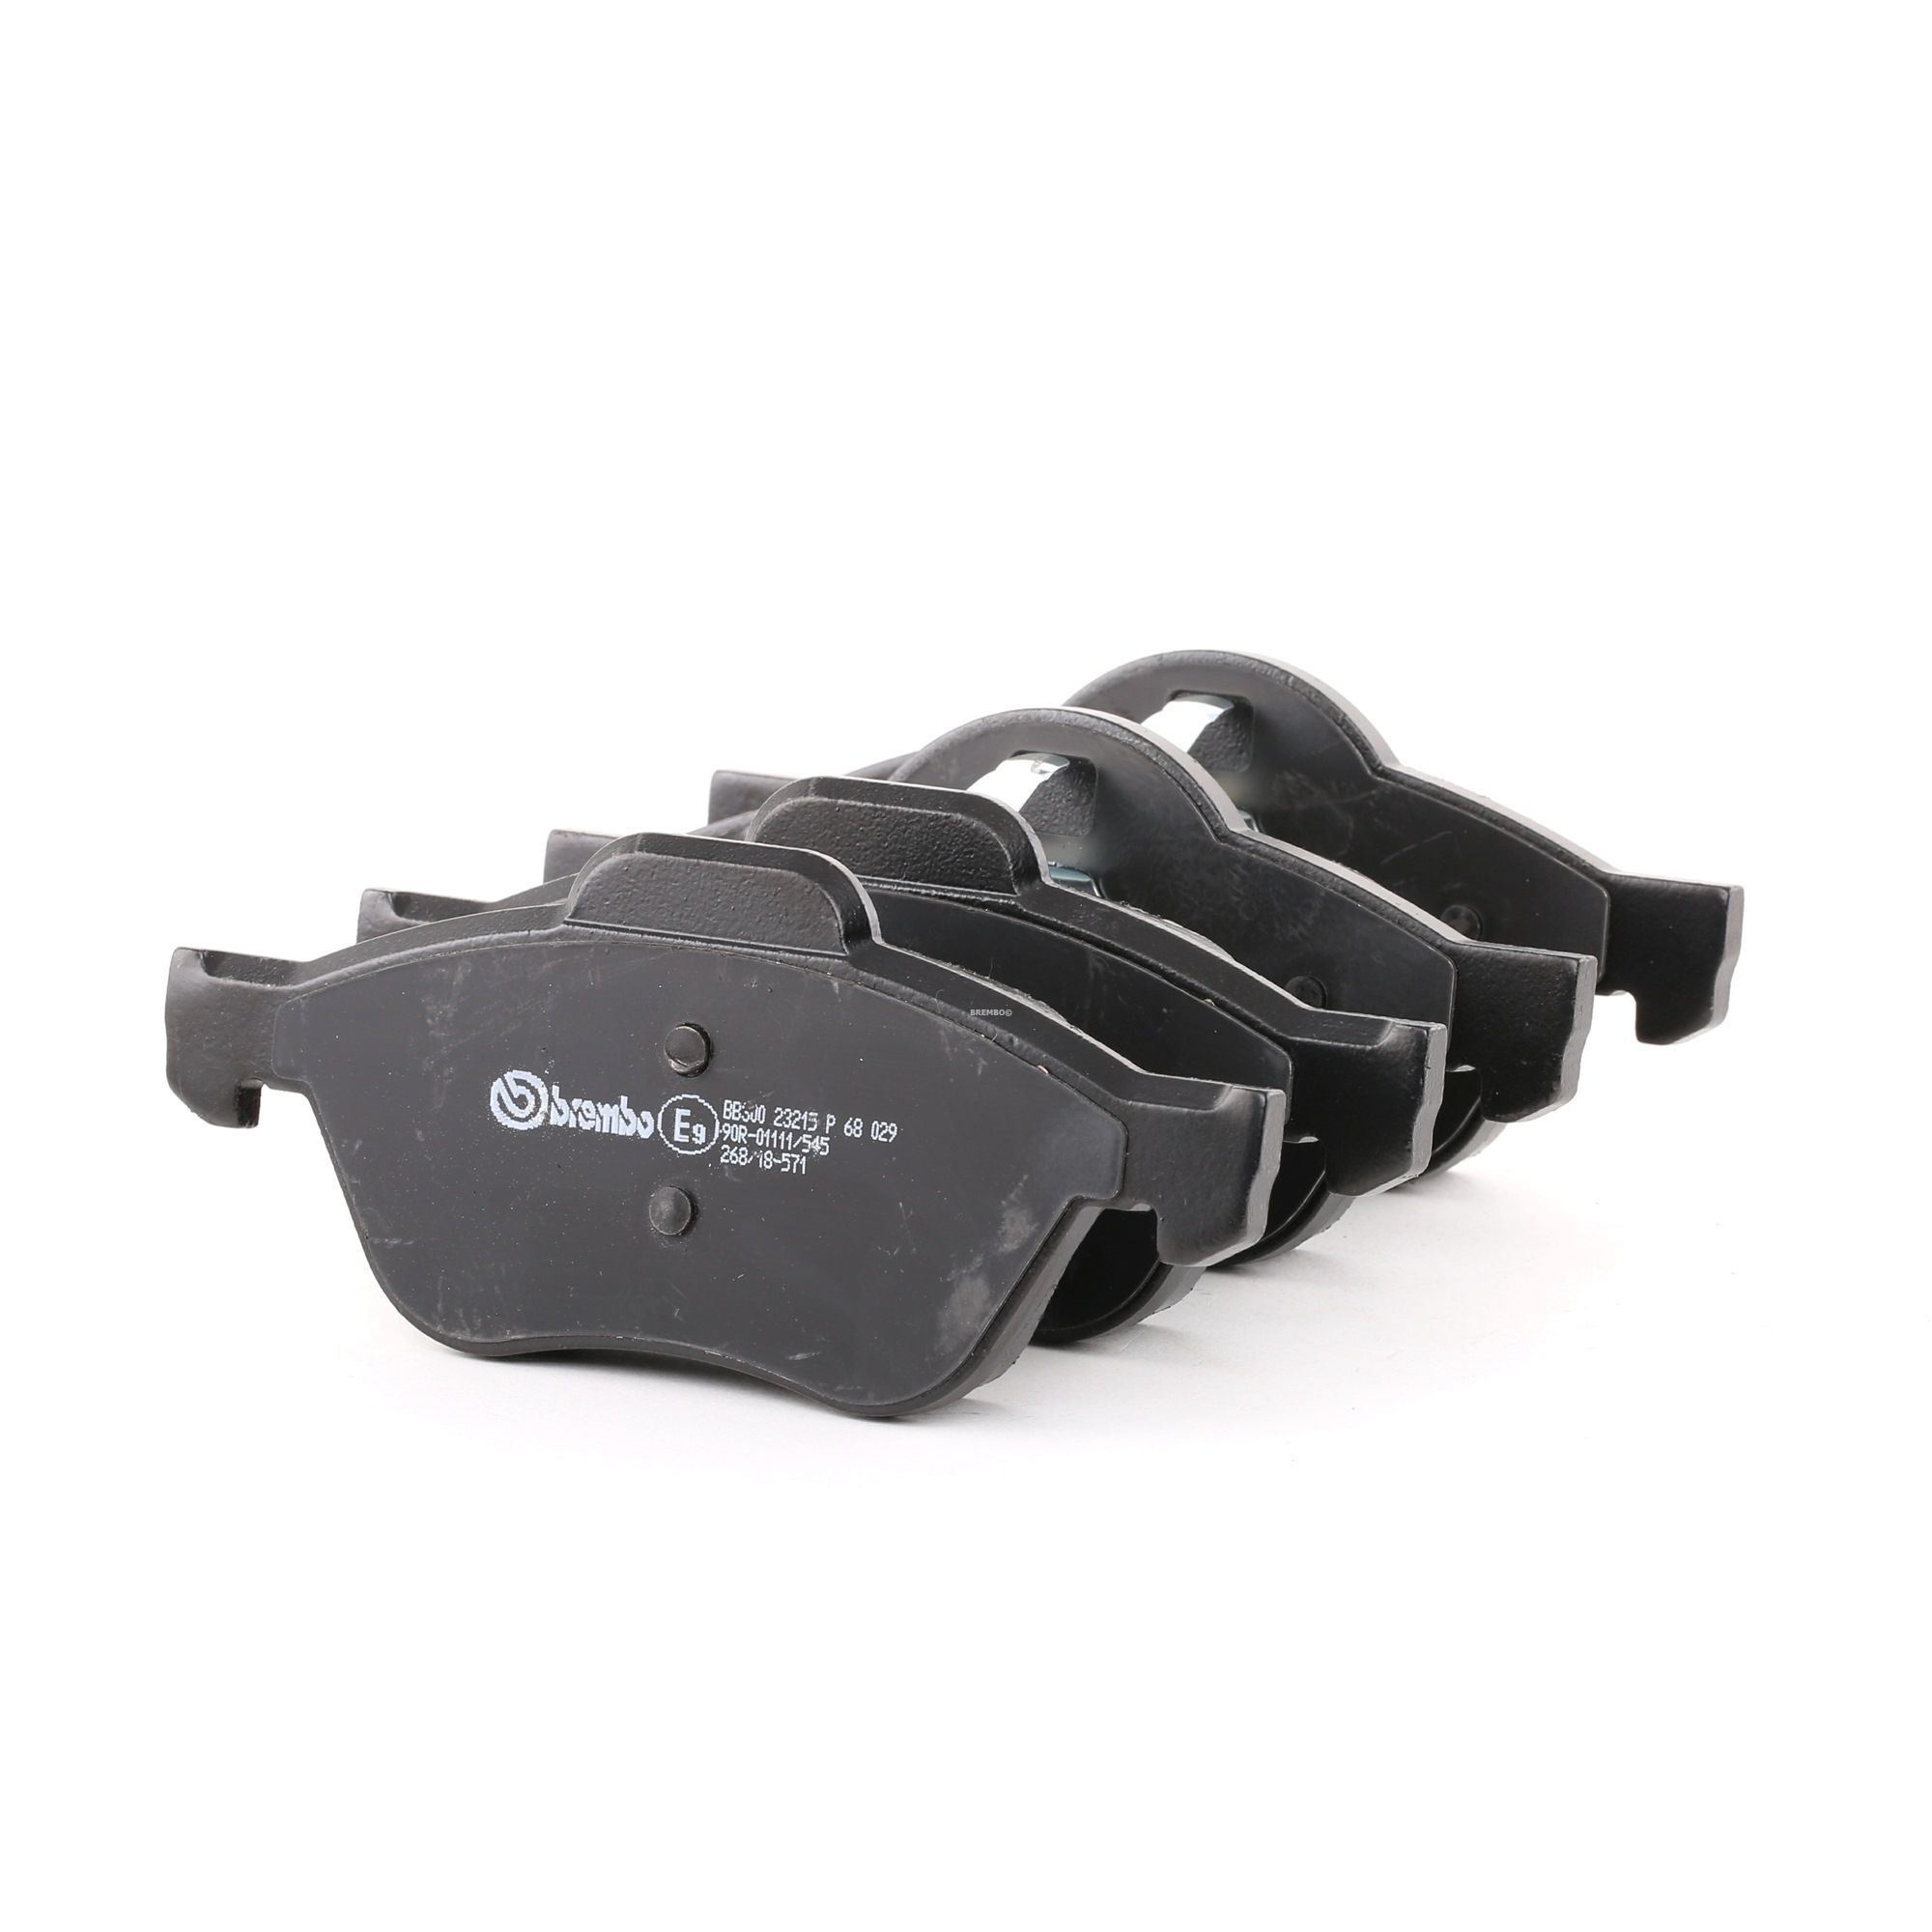 BREMBO P 68 029 Brake pad set excl. wear warning contact, with piston clip, with accessories